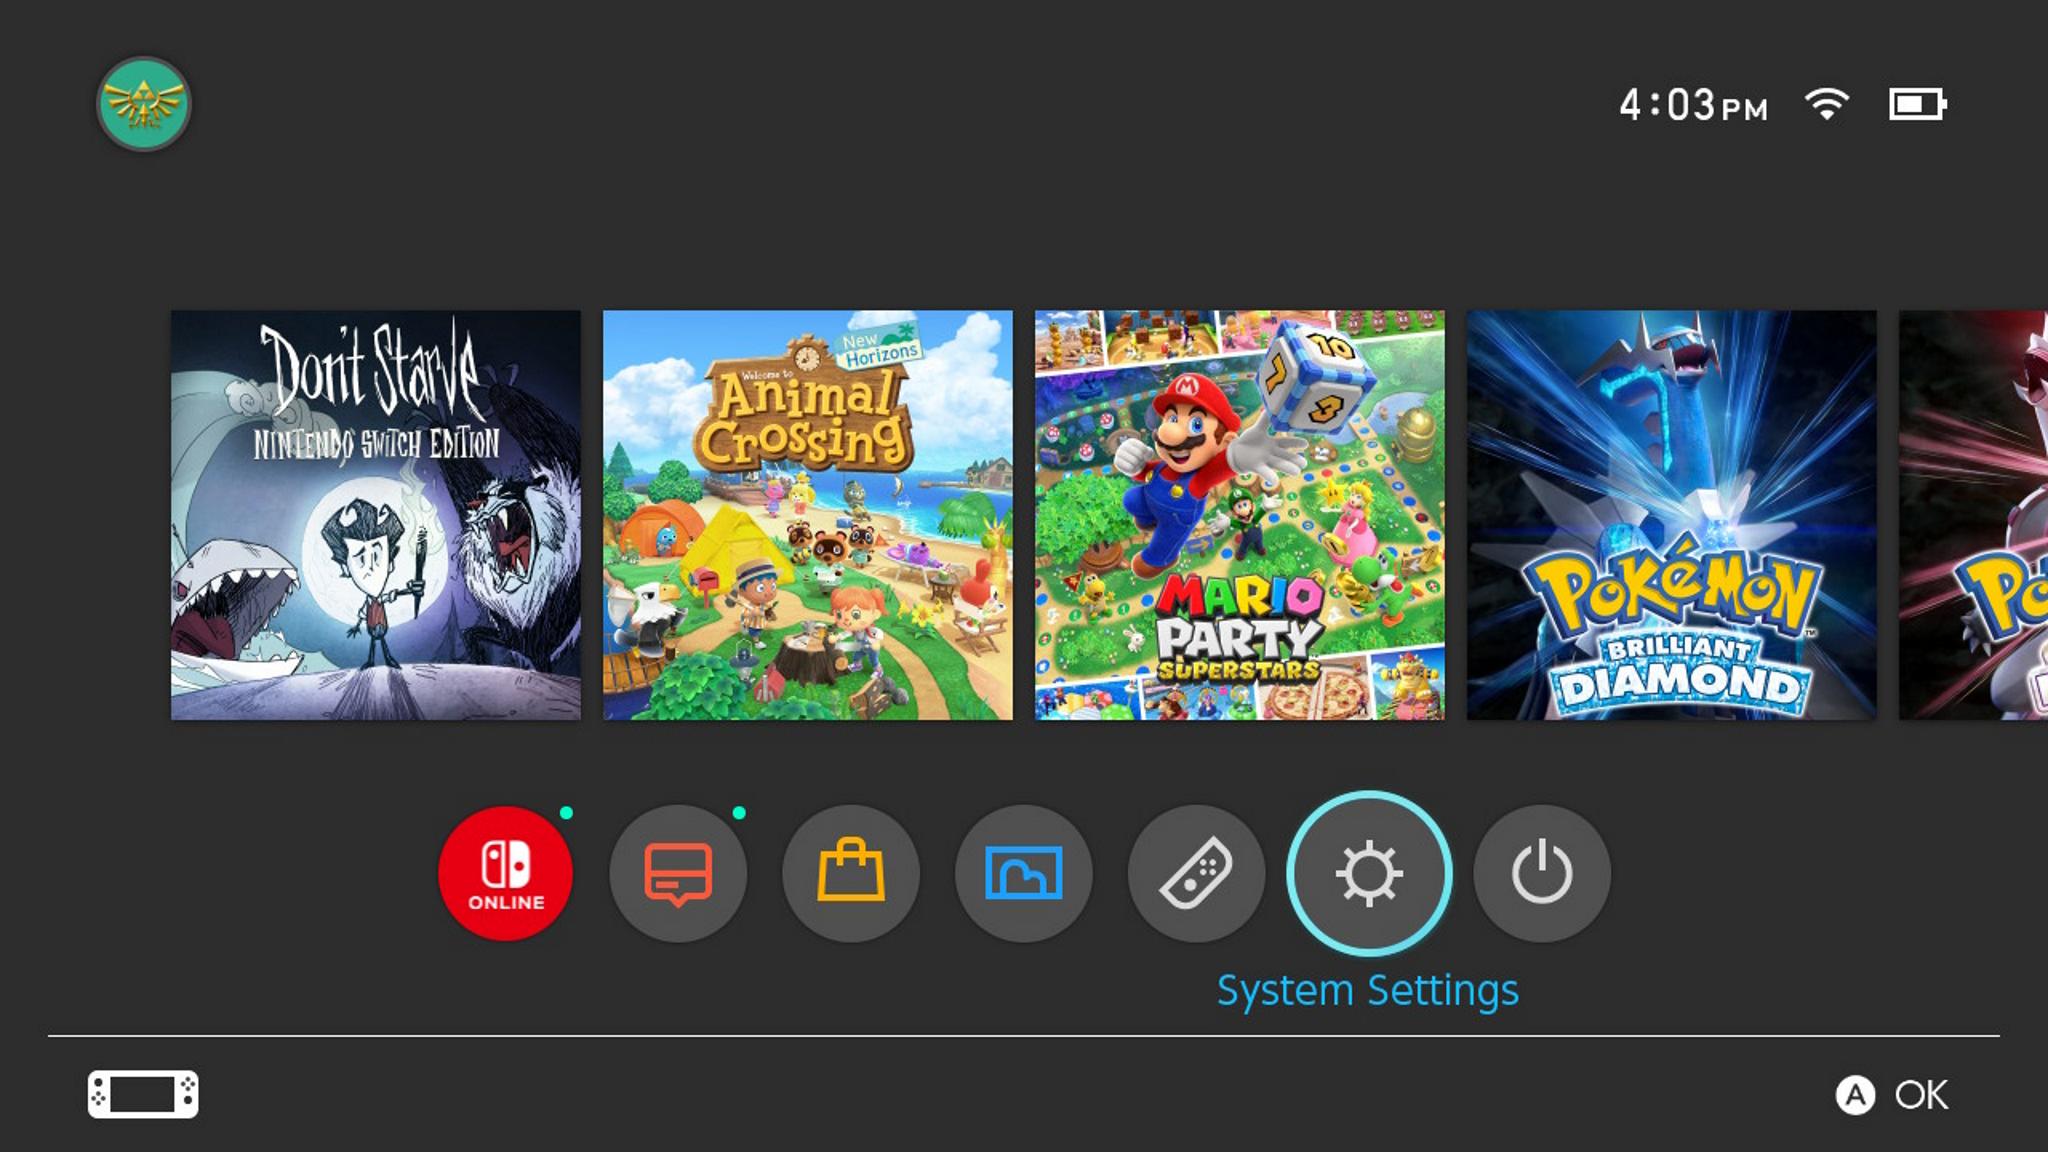 How to add additional Nintendo accounts to your Switch: Select System Settings from the home screen of your Switch